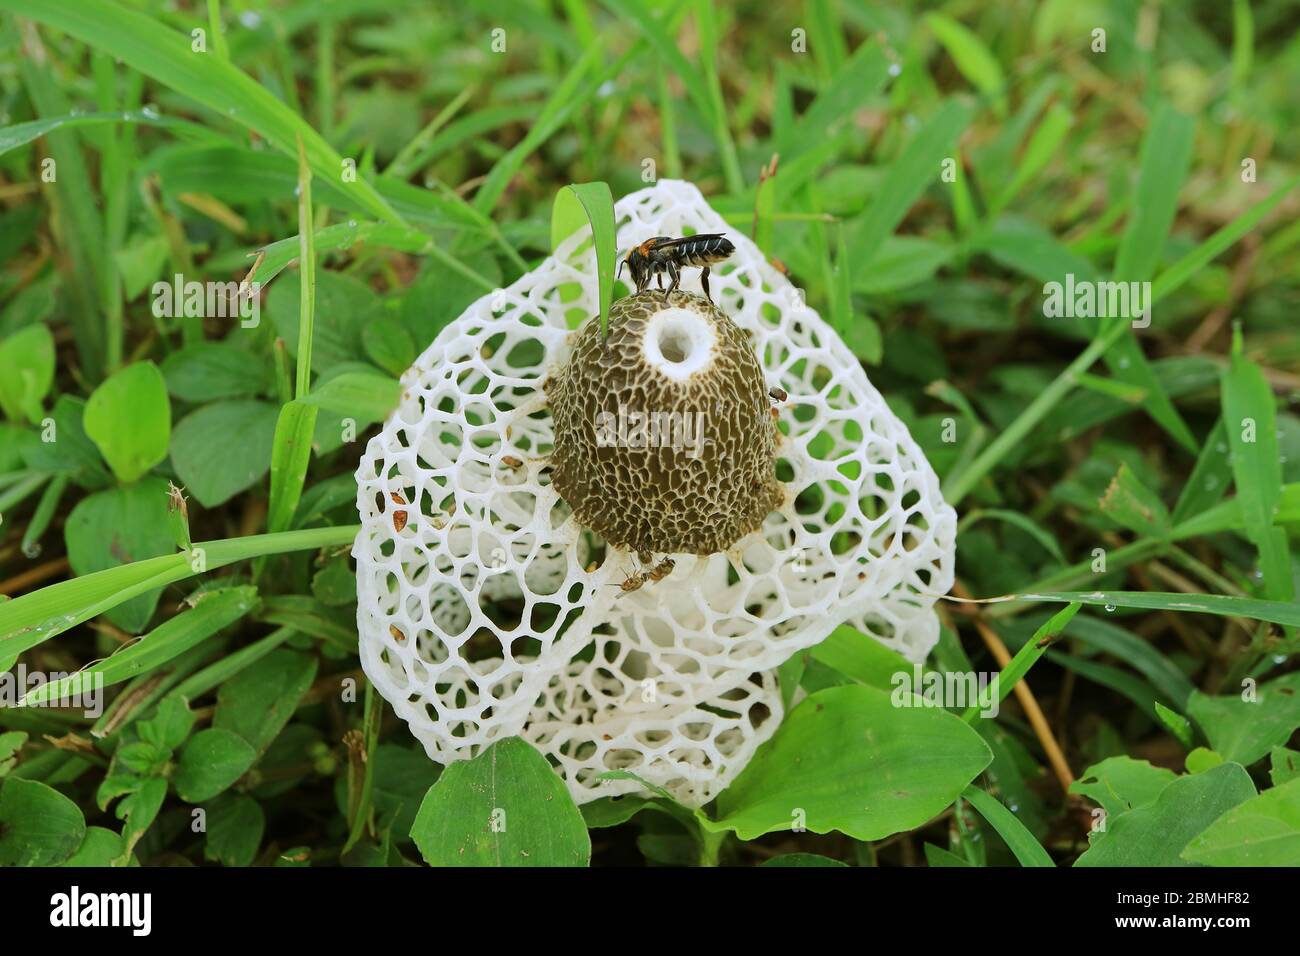 Bee and Many of Tiny Insects on a White Bamboo Fungus or Long Net Stinkhorn Mushroom in the Forest Stock Photo